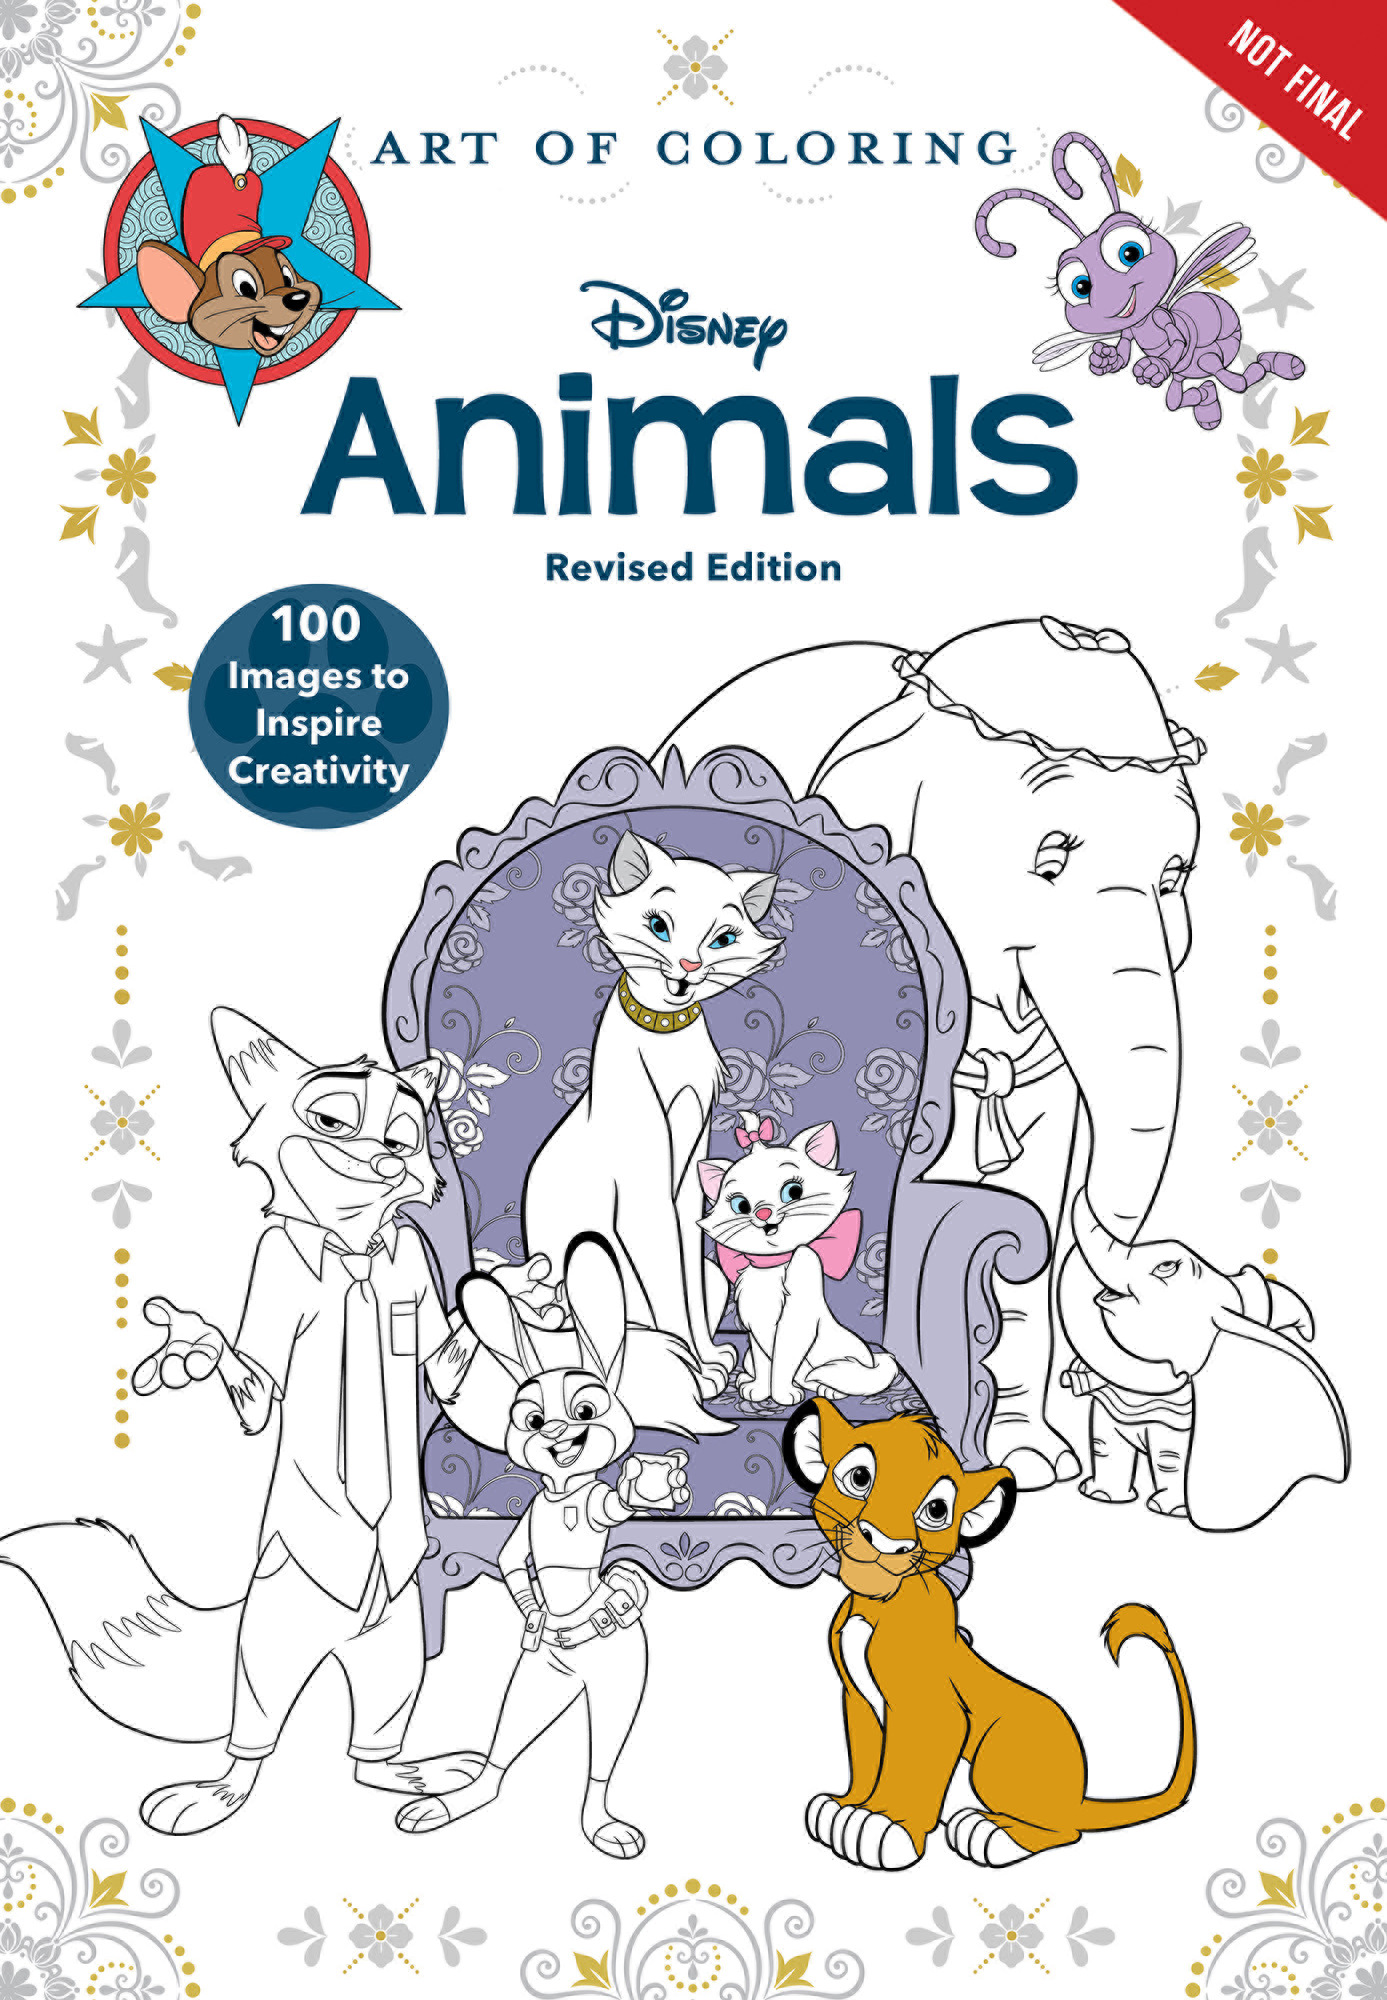 Art of Coloring: Disney Animals by Disney Books - Art of Coloring - Books